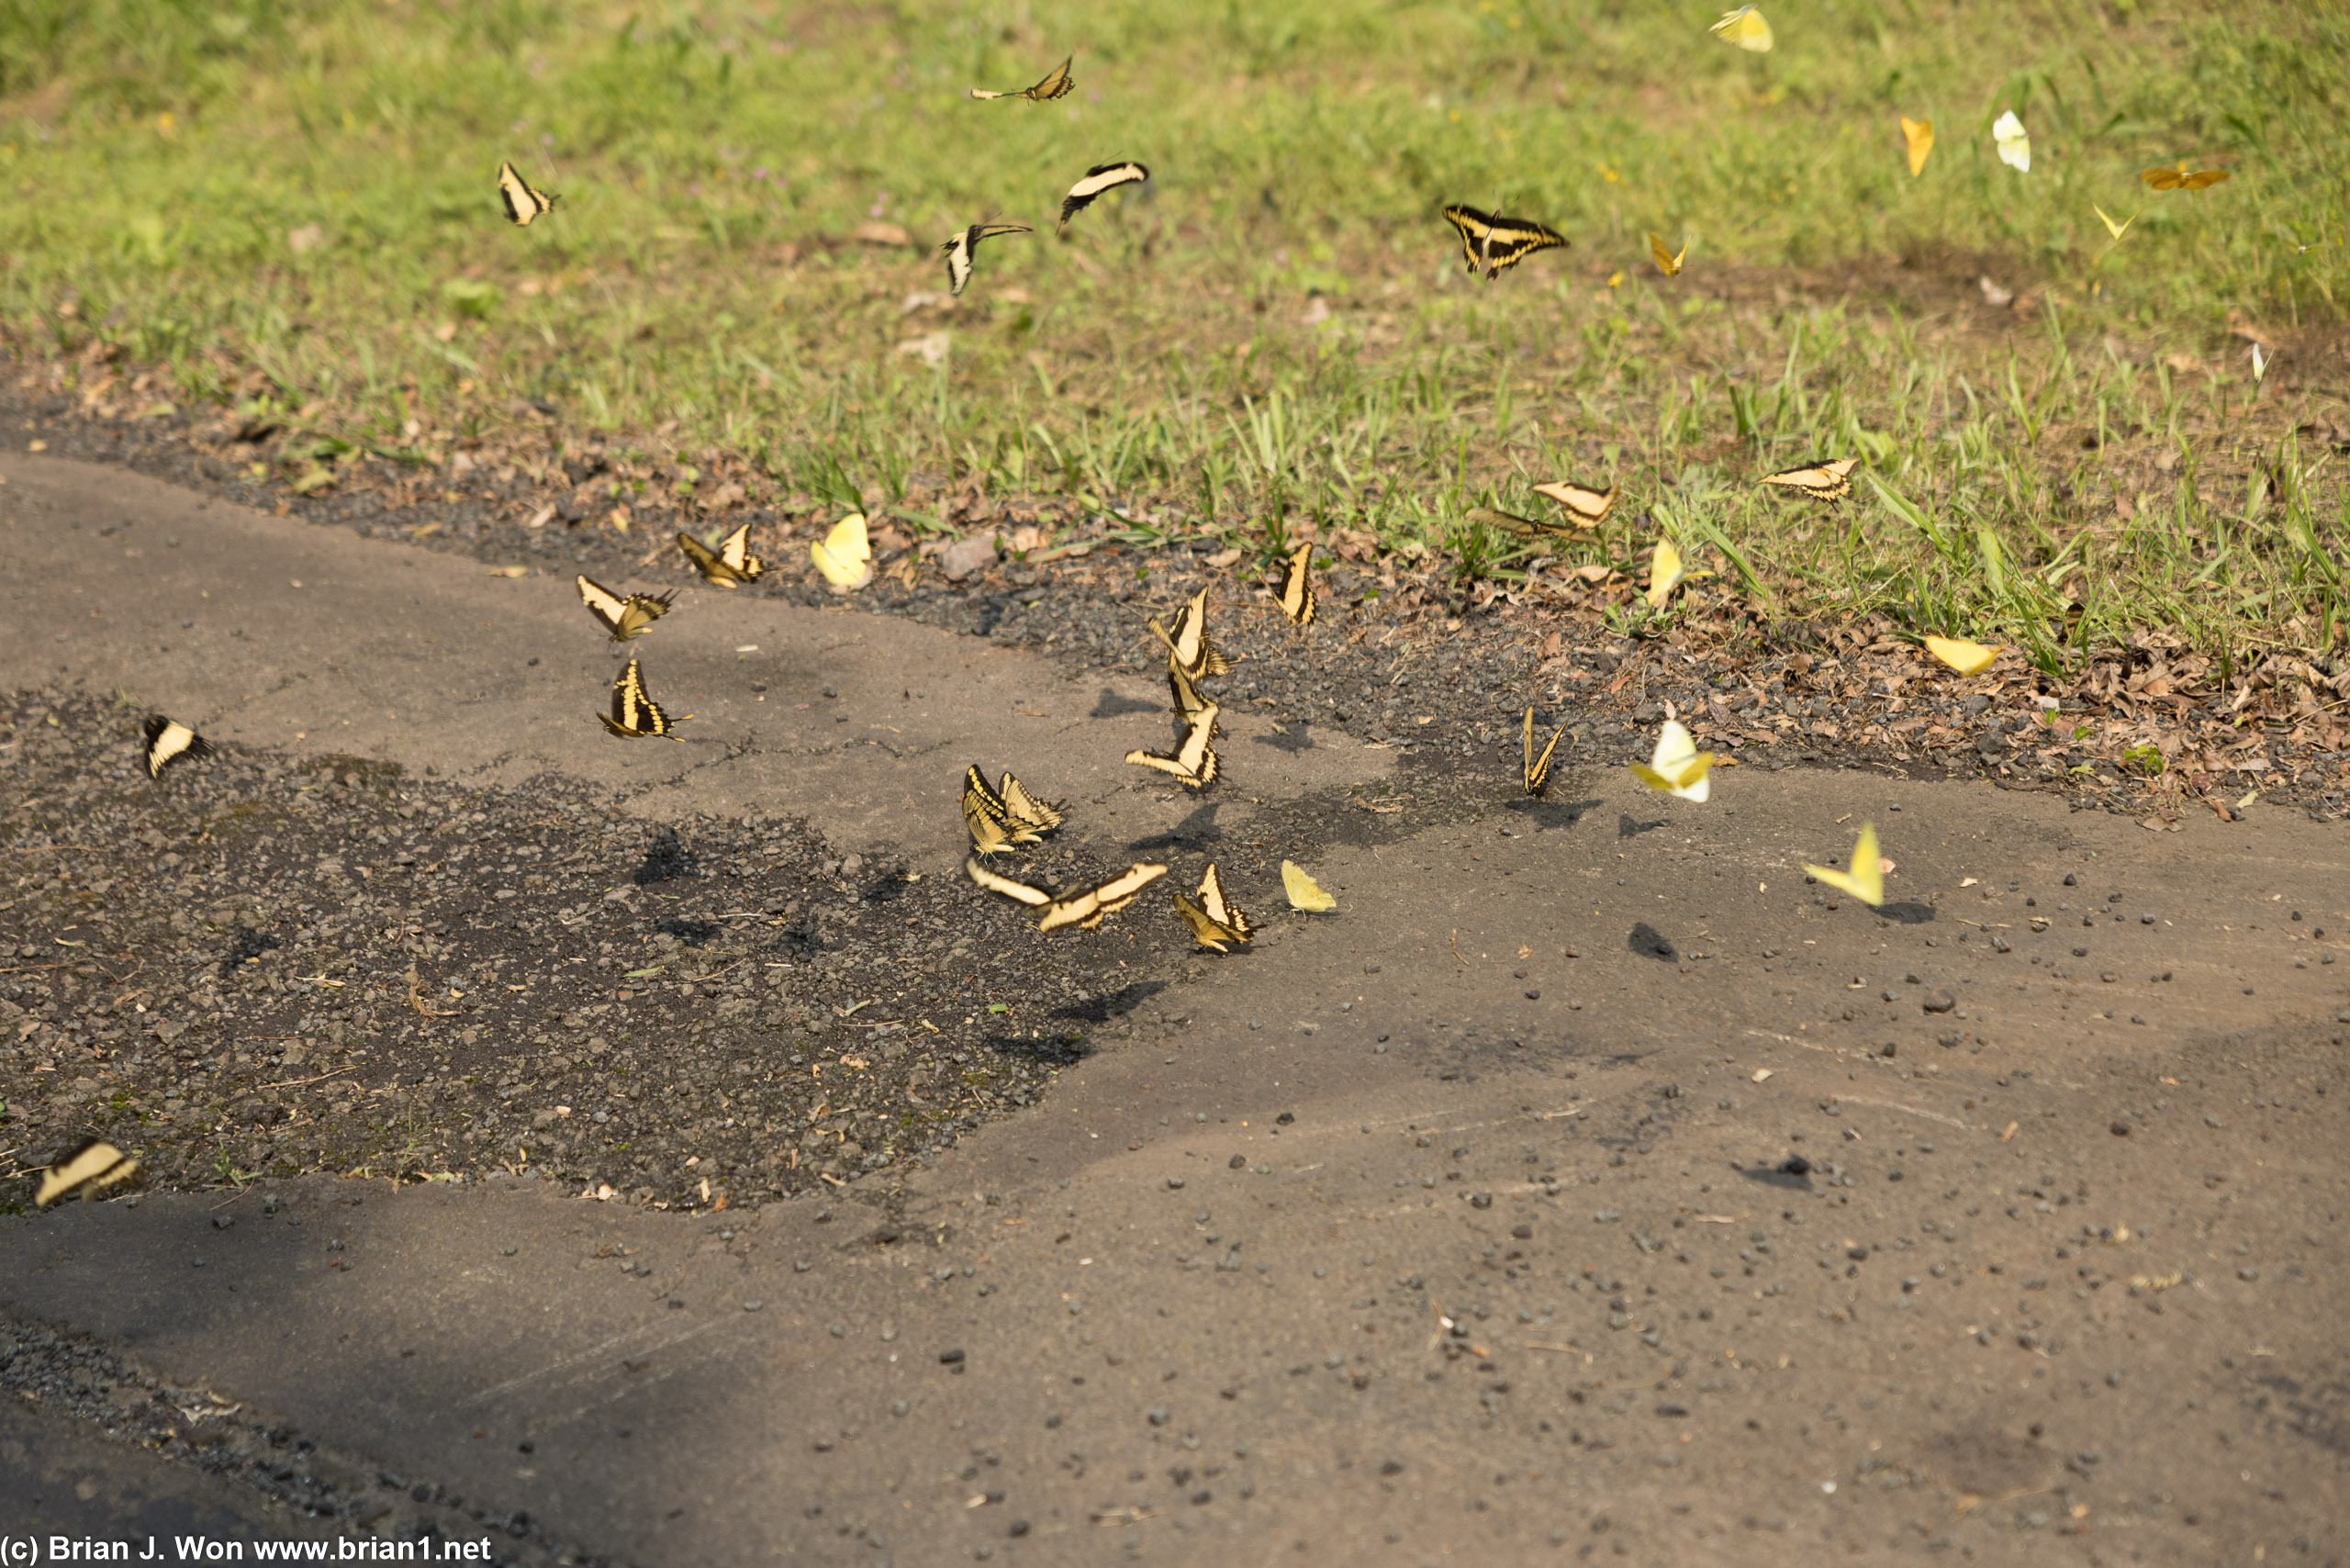 Butterflies on the side of the road.